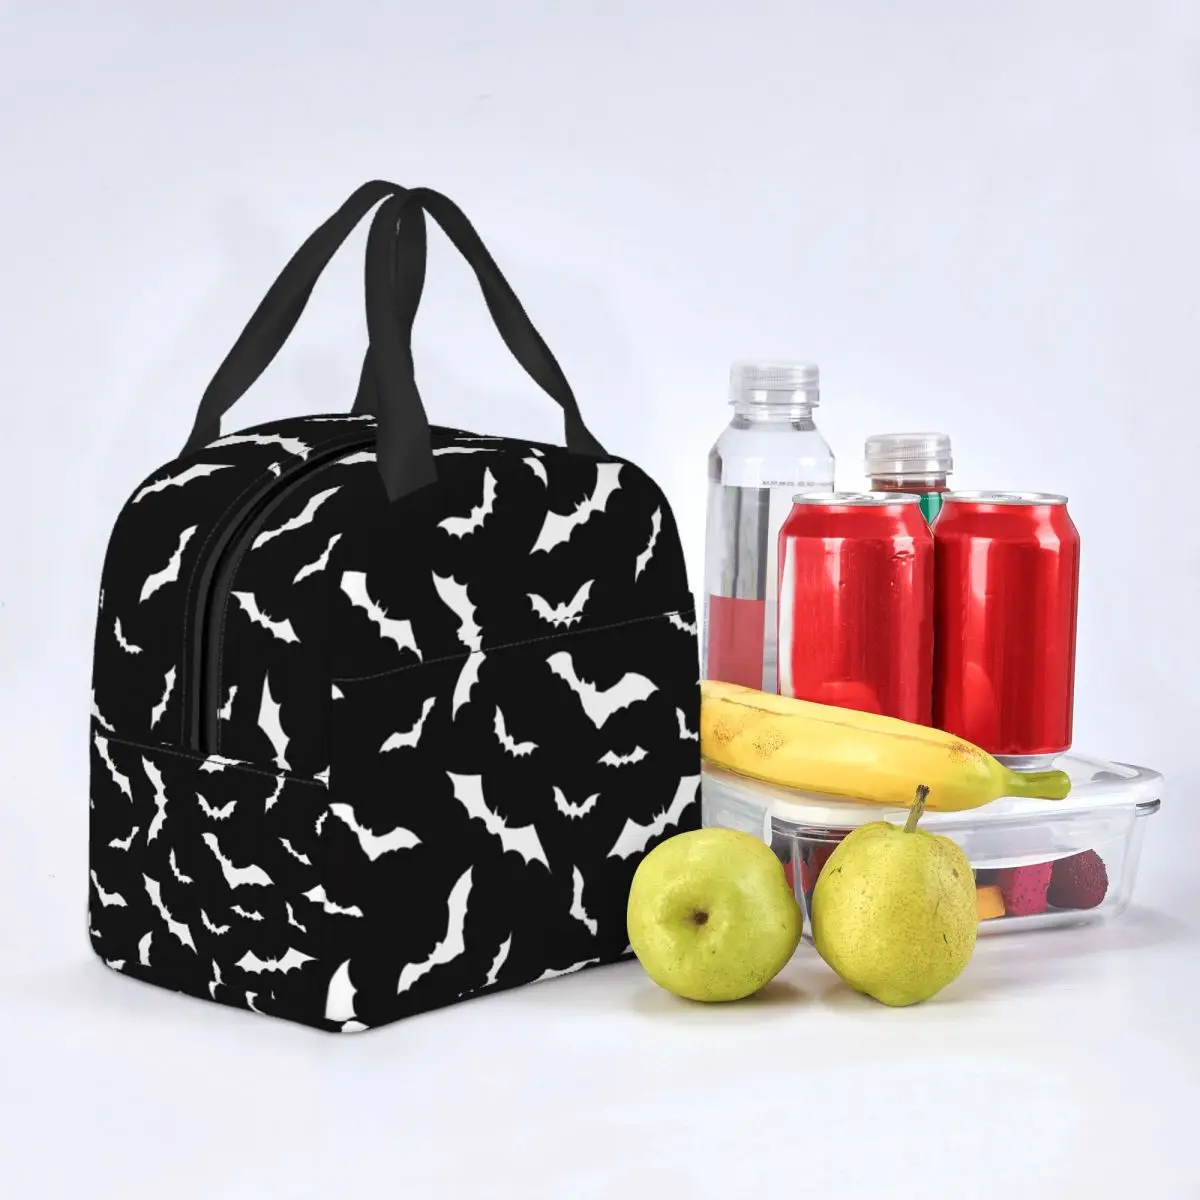 Bats Black Lunch Bag Portable Insulated Canvas Cooler Bag Thermal School Lunch Box for Women Children